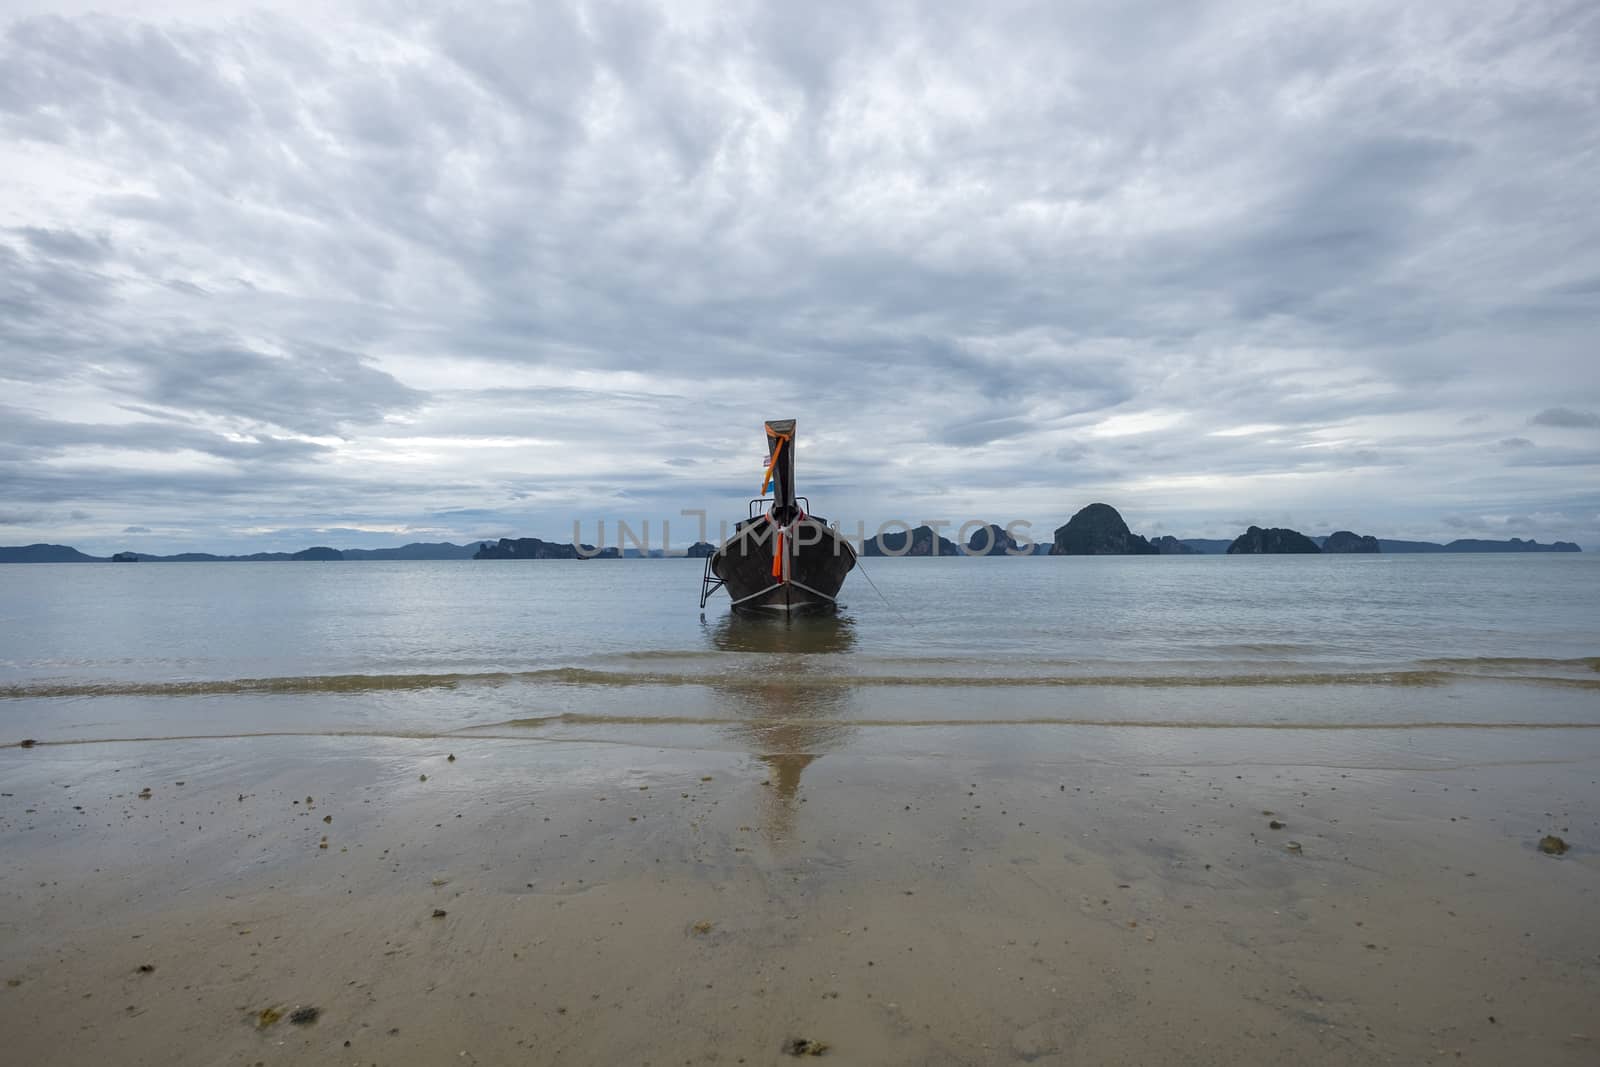 Traditional thai longtail boat near the beach in cloudy weather. by rainfallsup